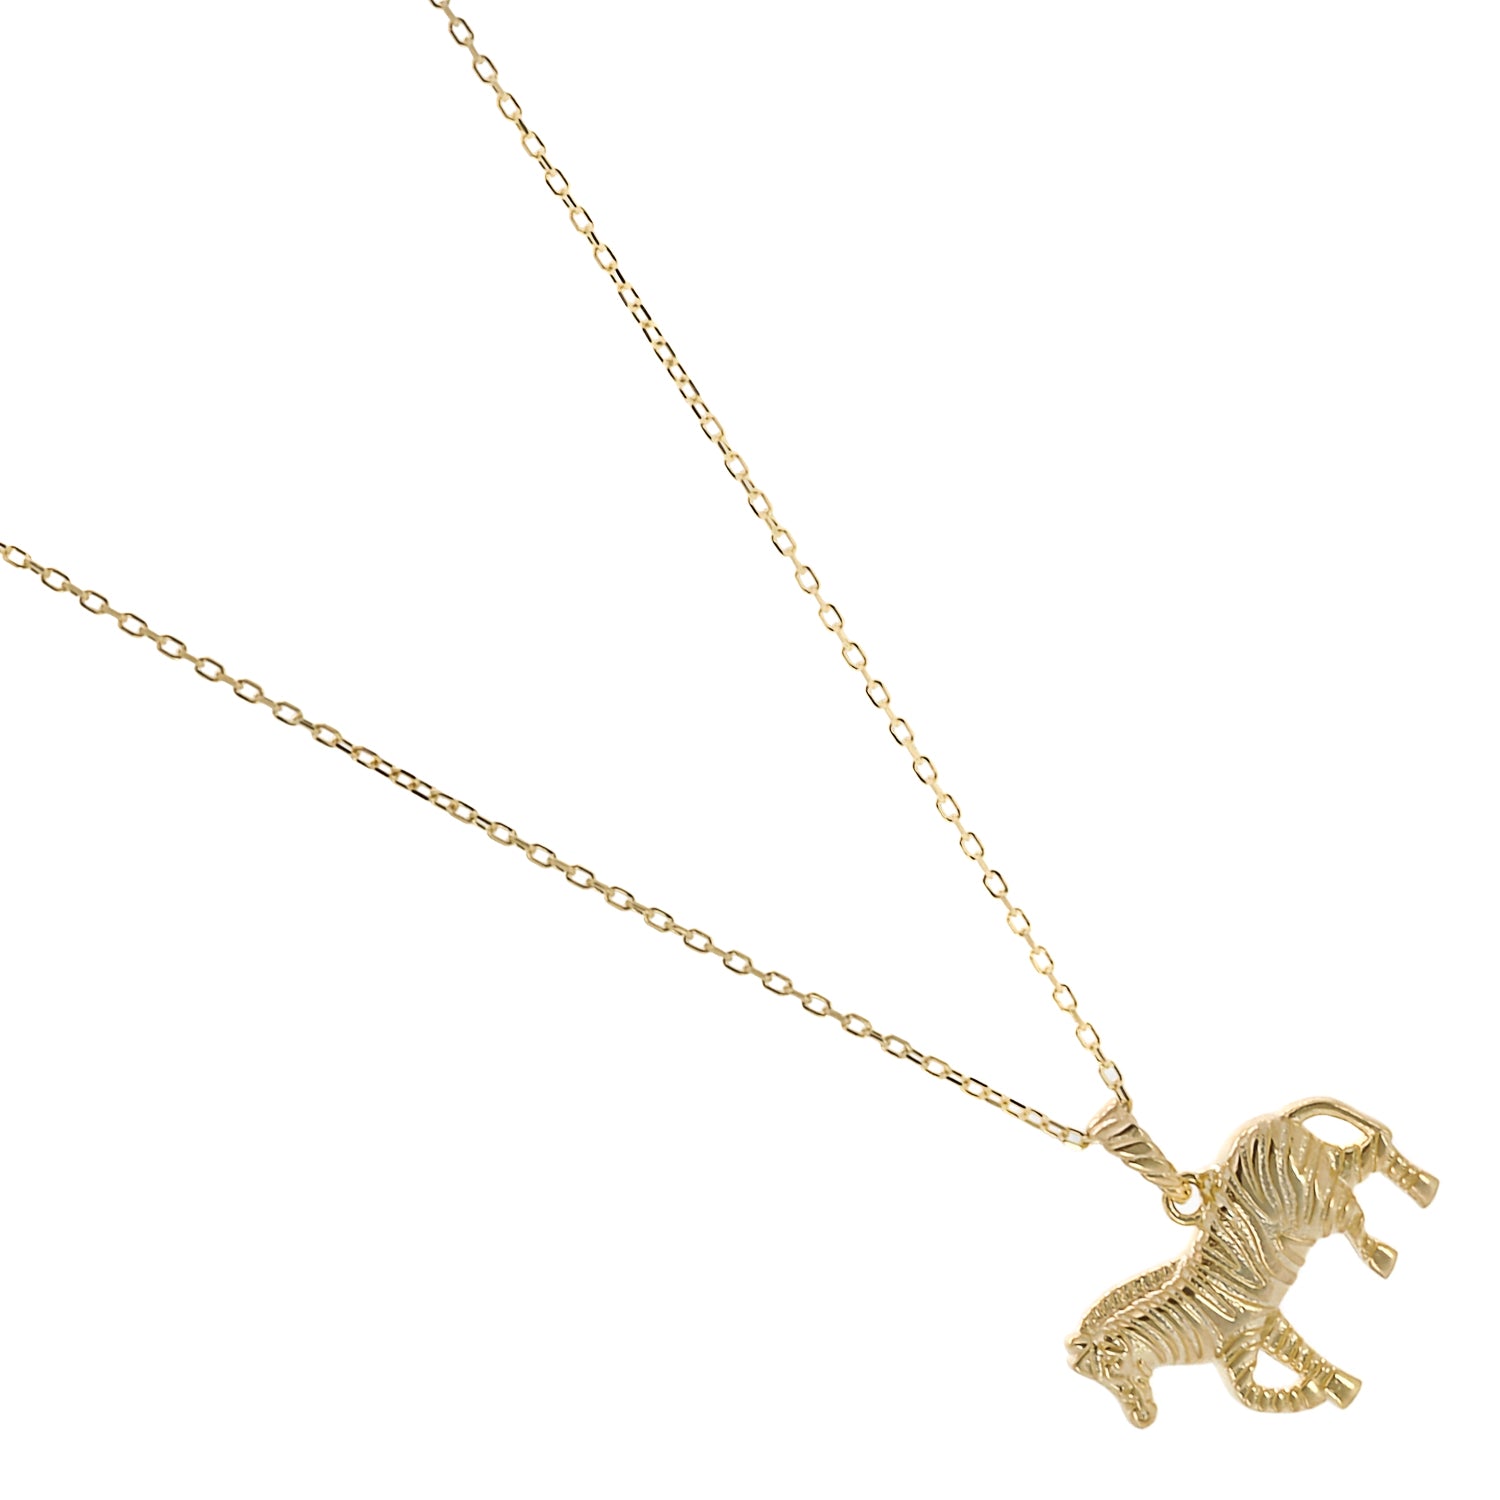 A close-up of the Gold Zebra Necklace, showcasing the intricate detailing and craftsmanship of the zebra pendant.